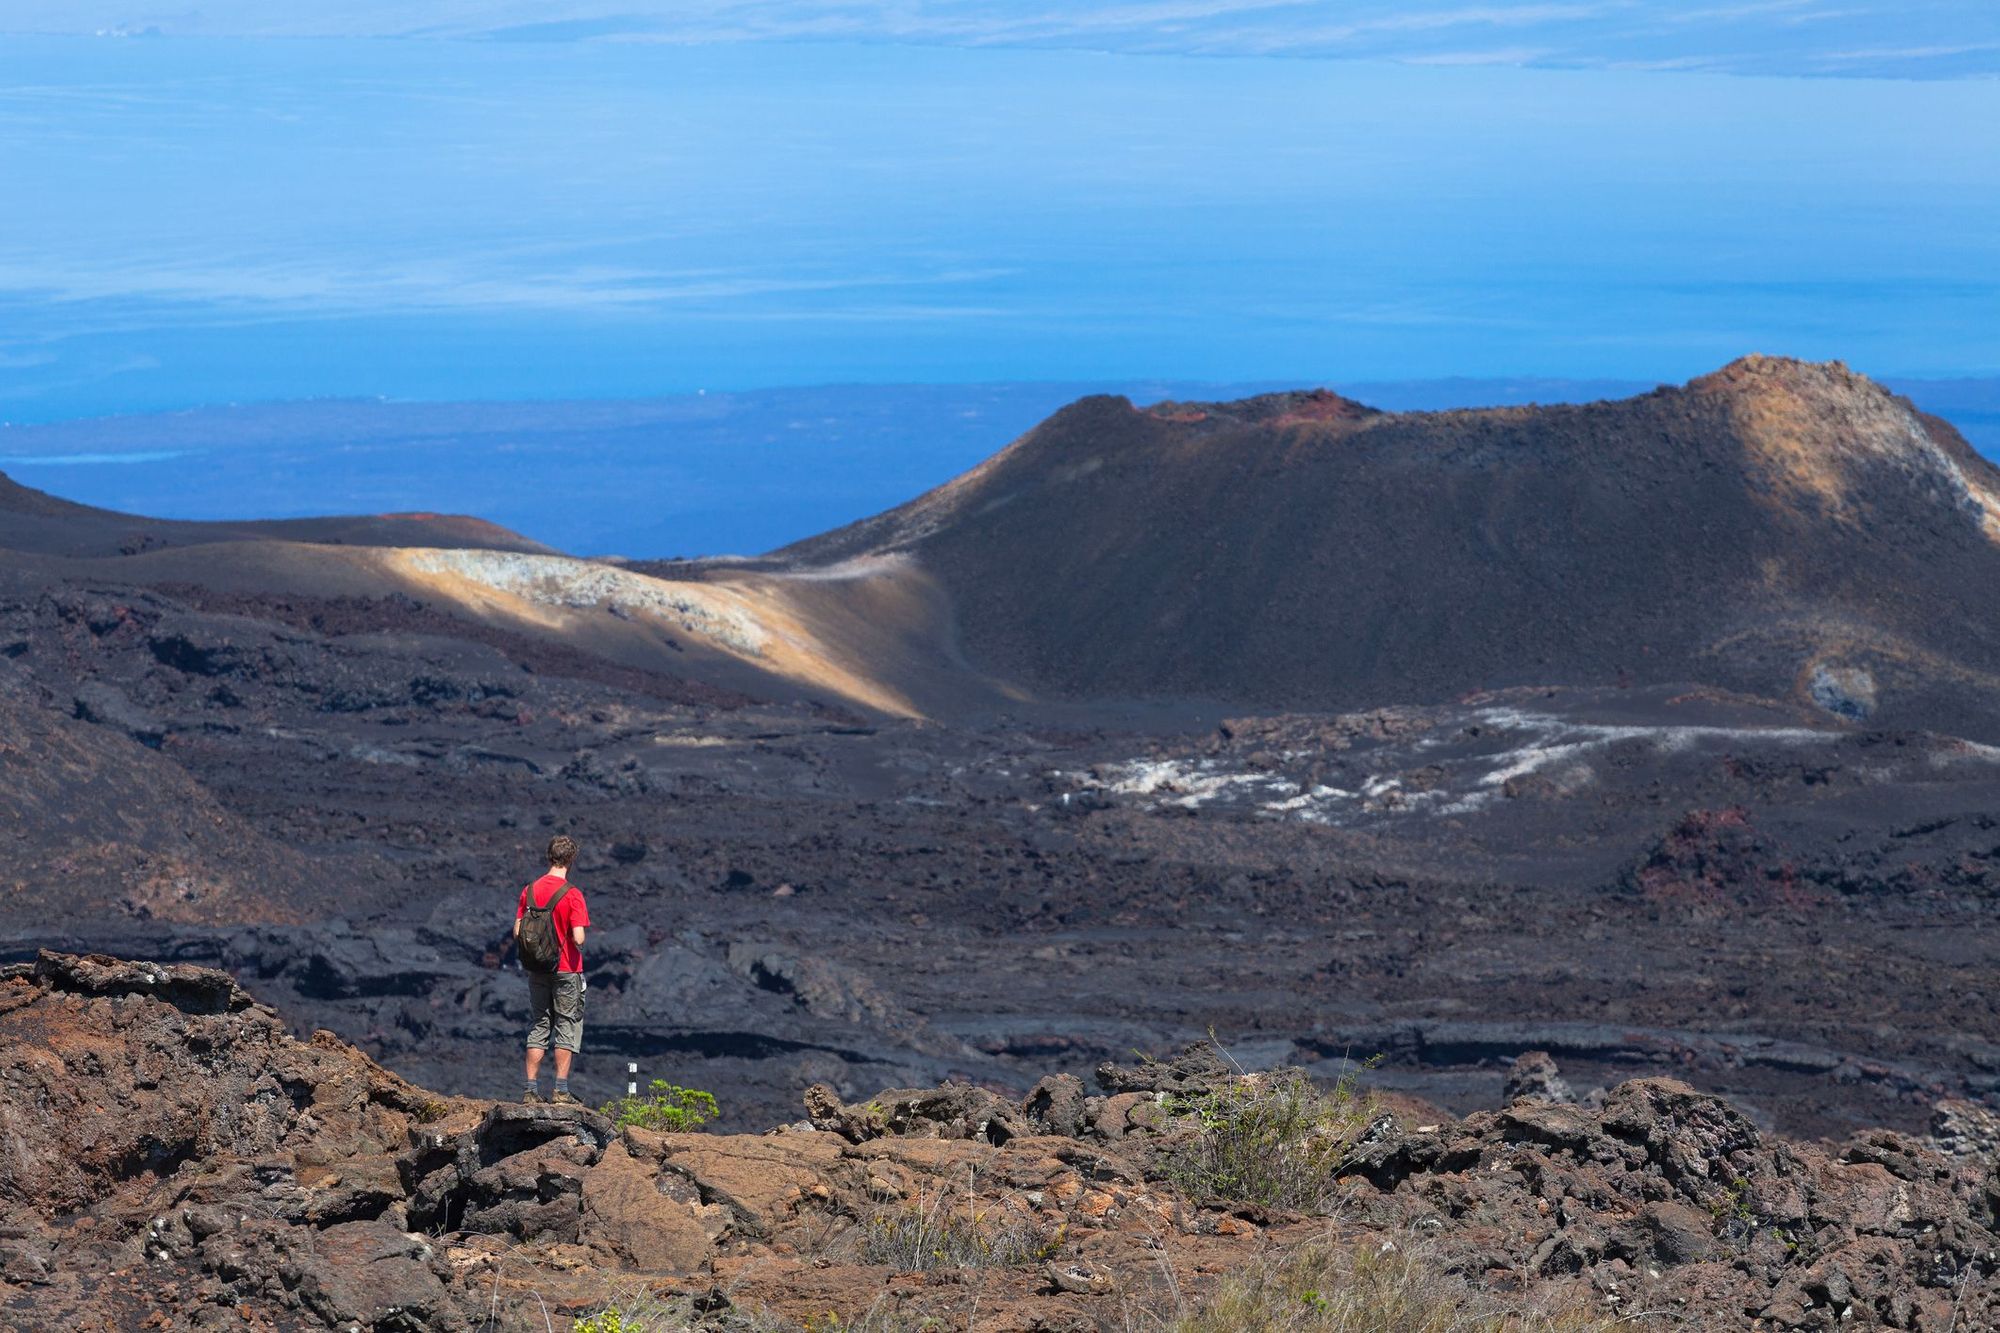 The volcanic landscape of Sierra Negra, on the Galapagos Islands in Ecuador